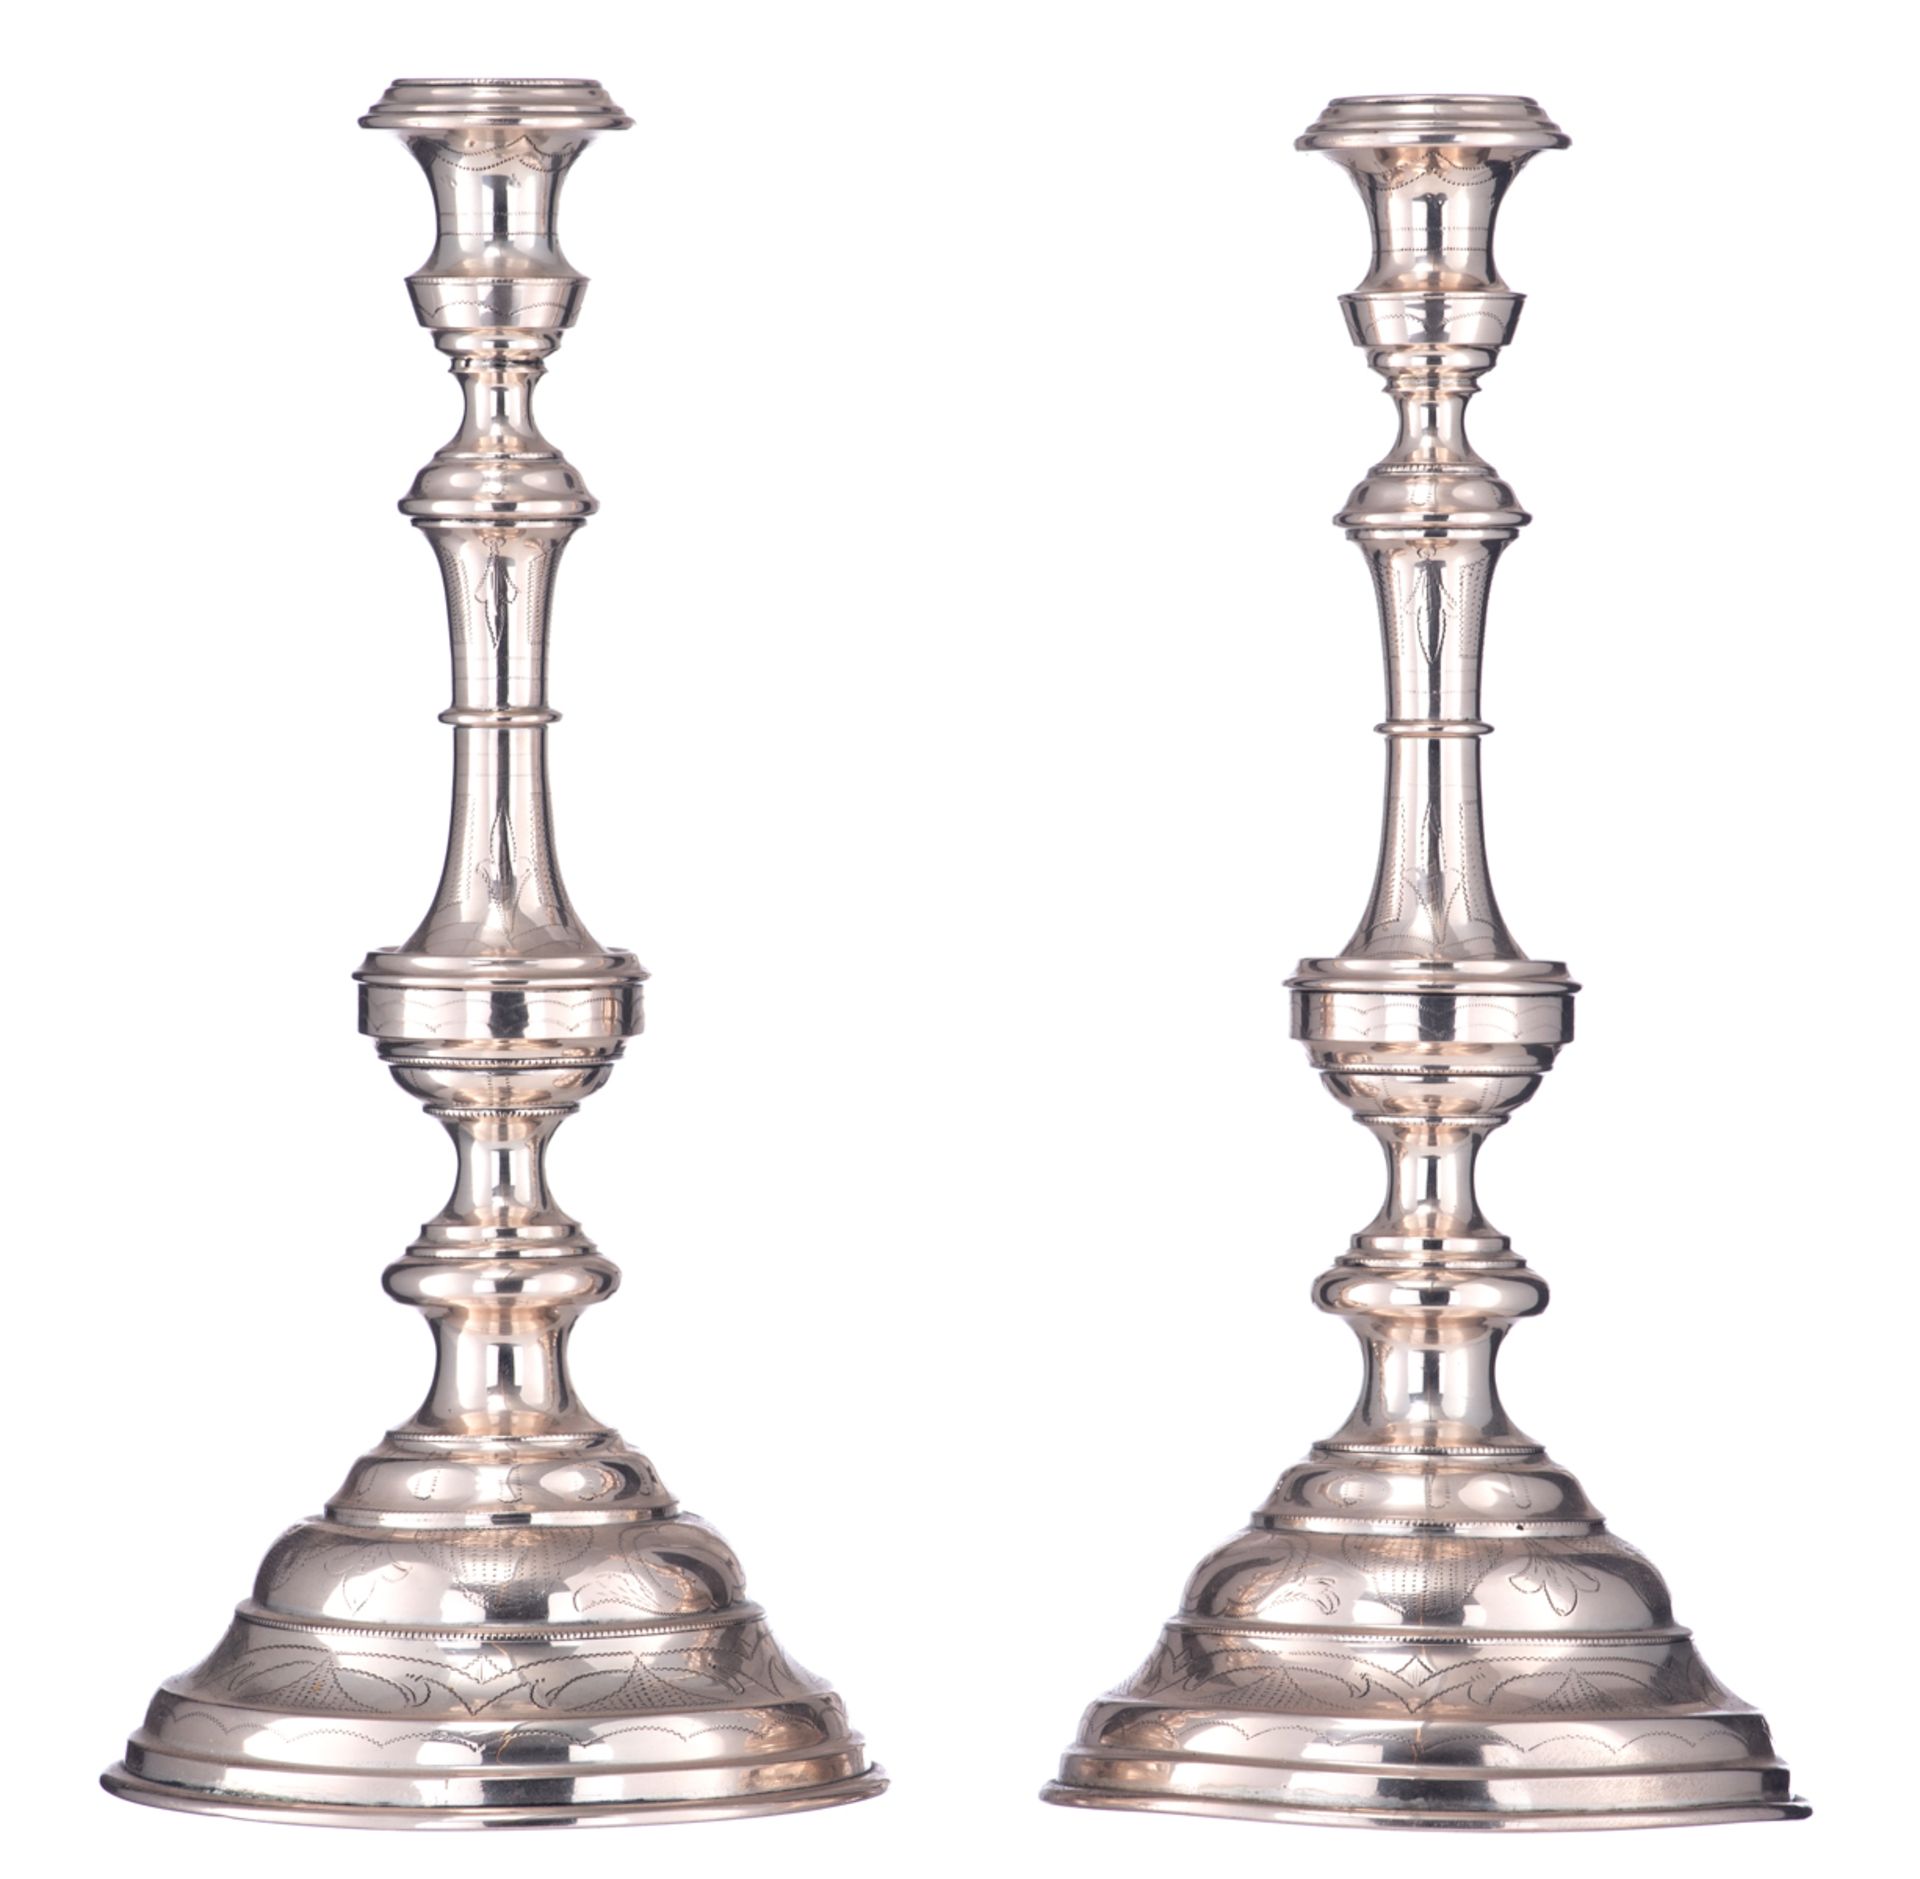 A pair of late 19th / early 20thC. Austro-Hungarian - Vienna 800/000 silver candlesticks, the body e